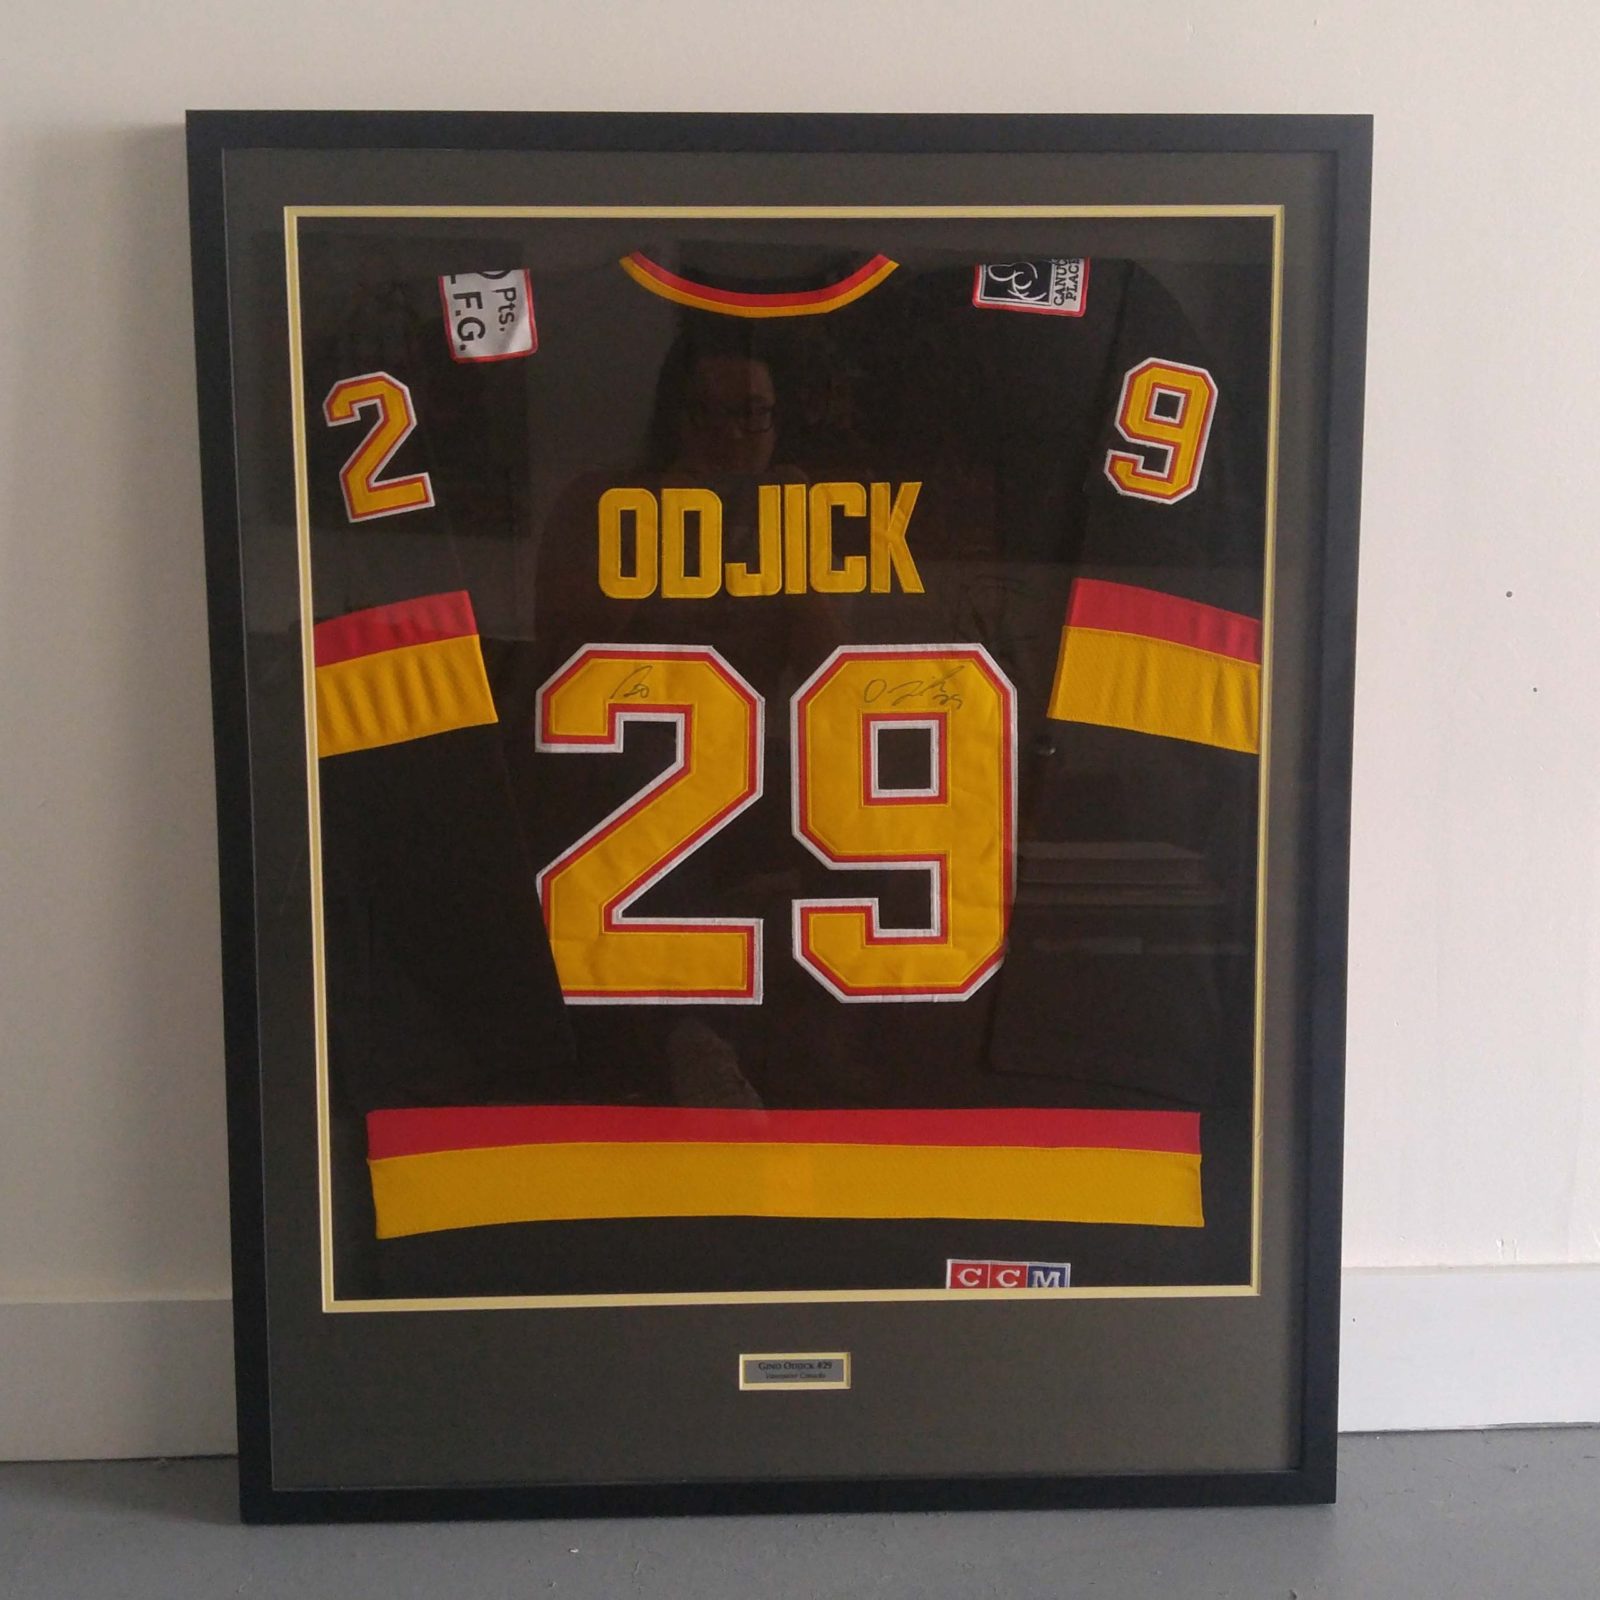 Framing Two Jerseys in One Frame (Photos and Video) - Jacquez Art & Jersey  Framing